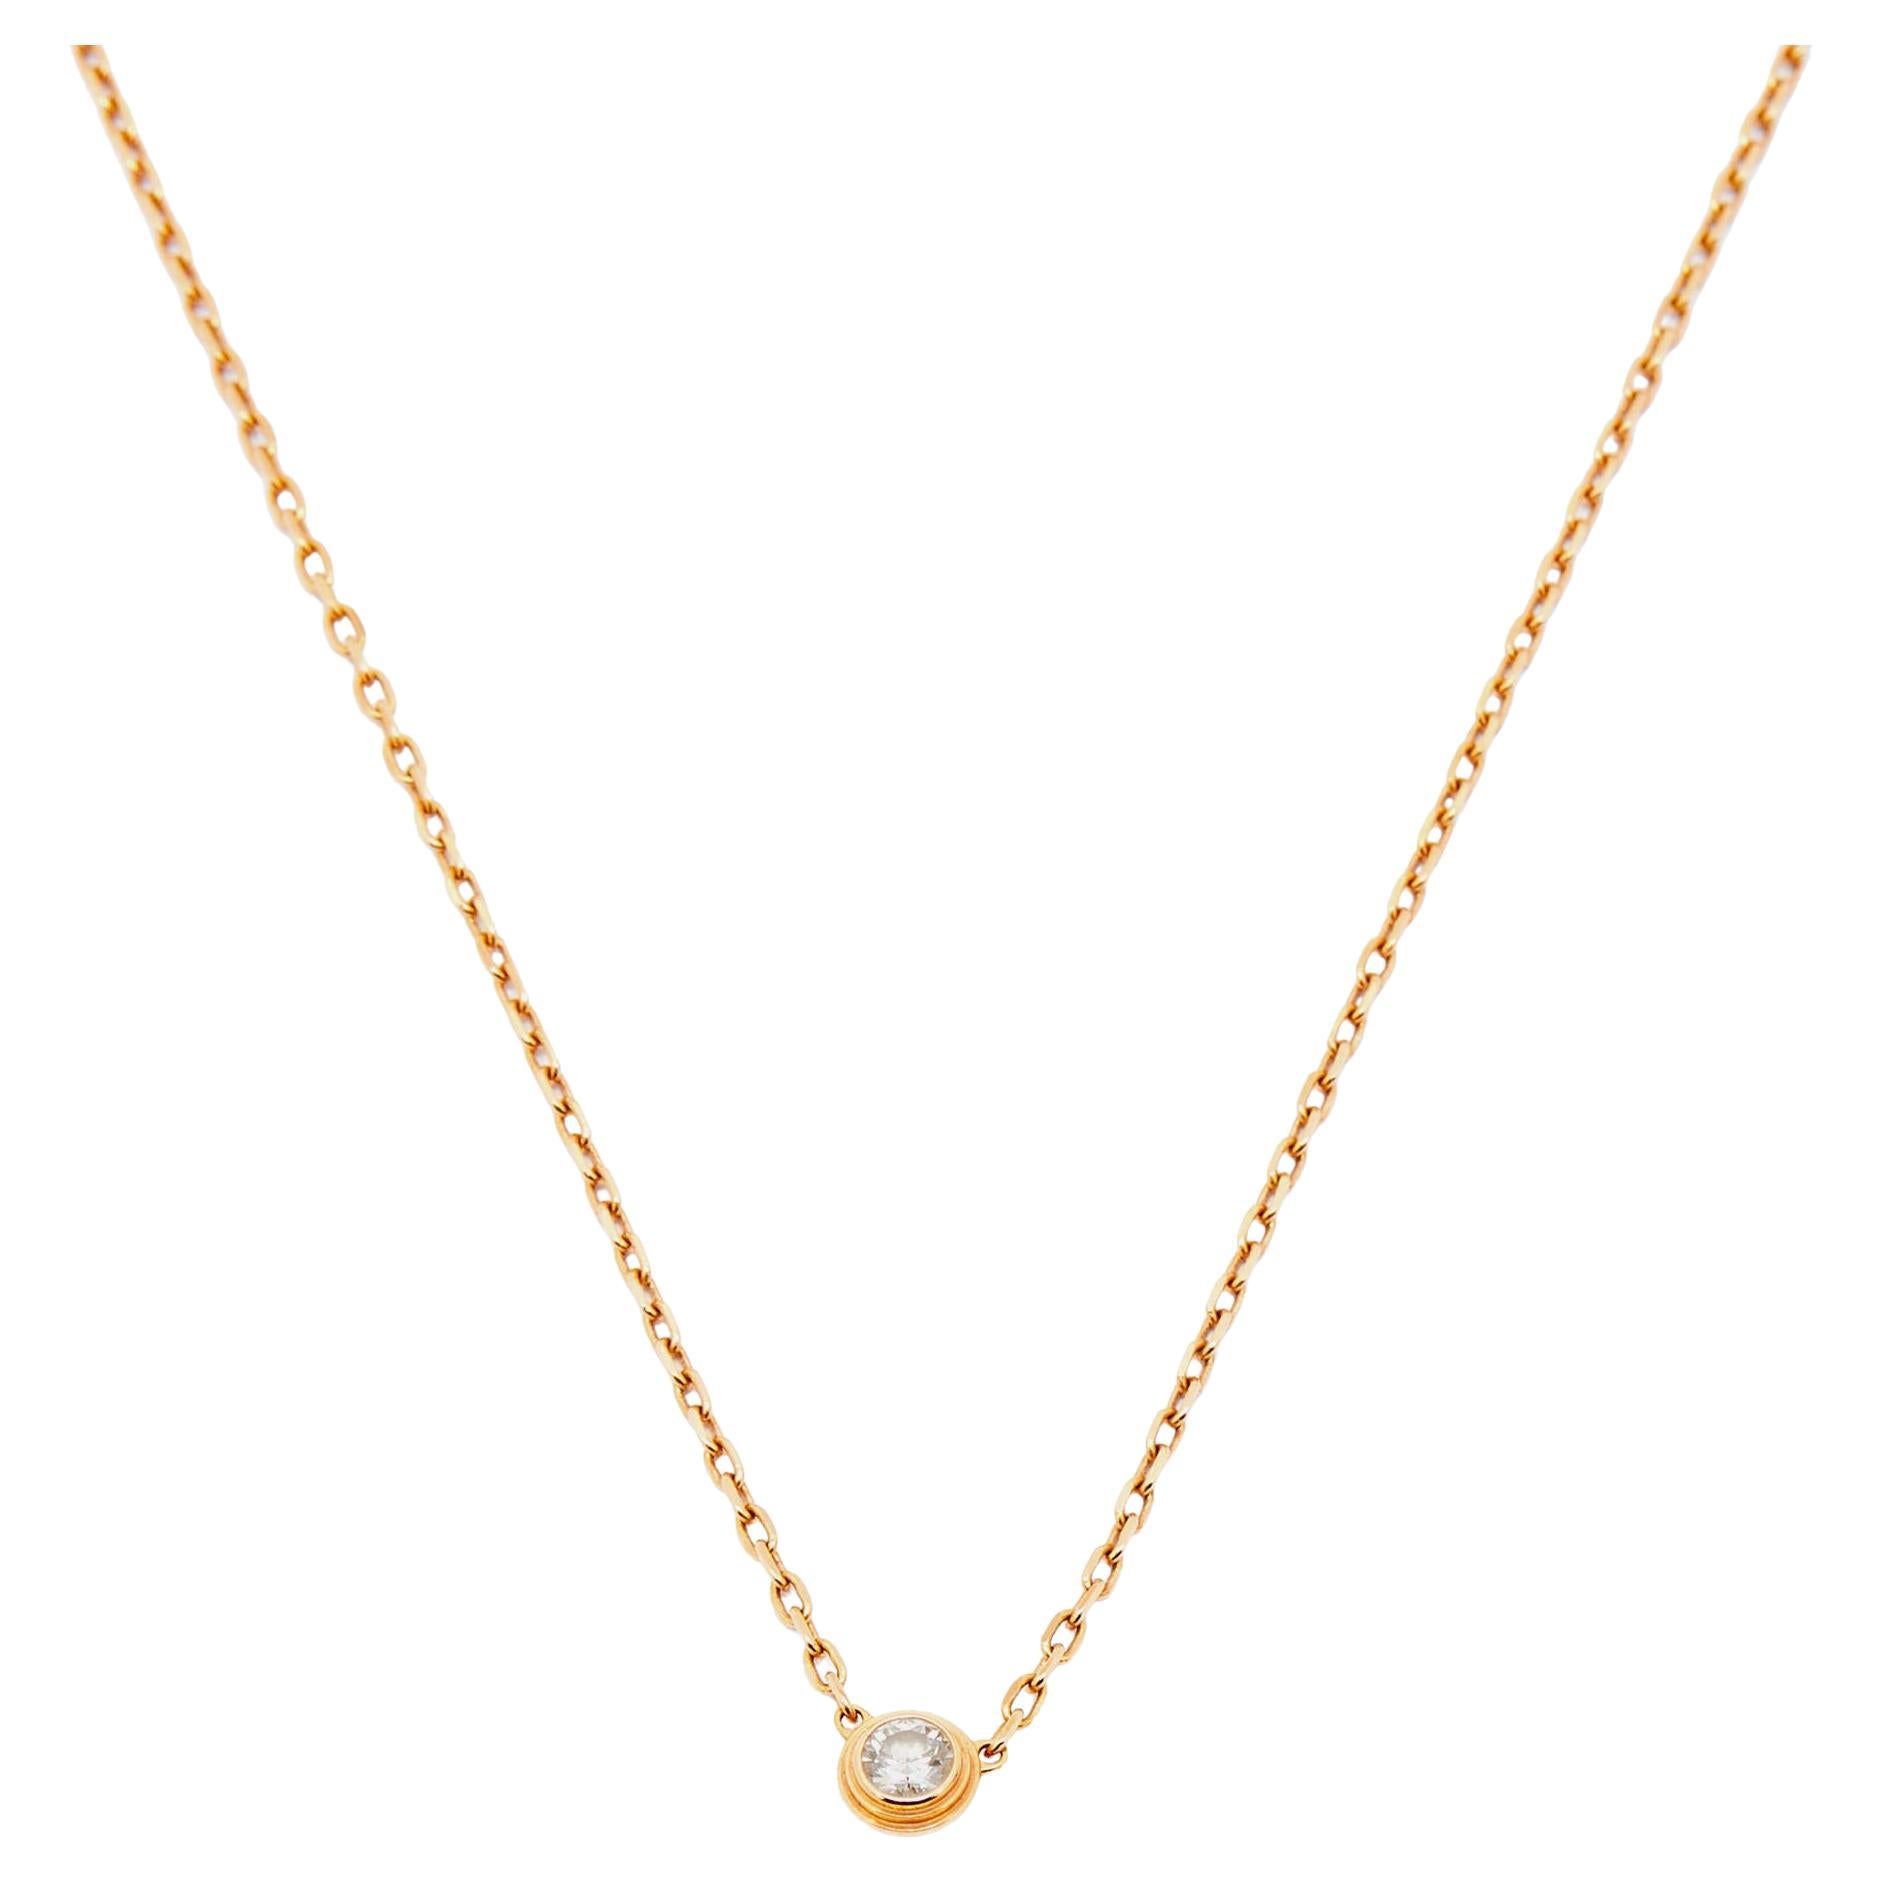 Cartier D'Amour Diamond 18k Rose Gold Small Model Chain Necklace